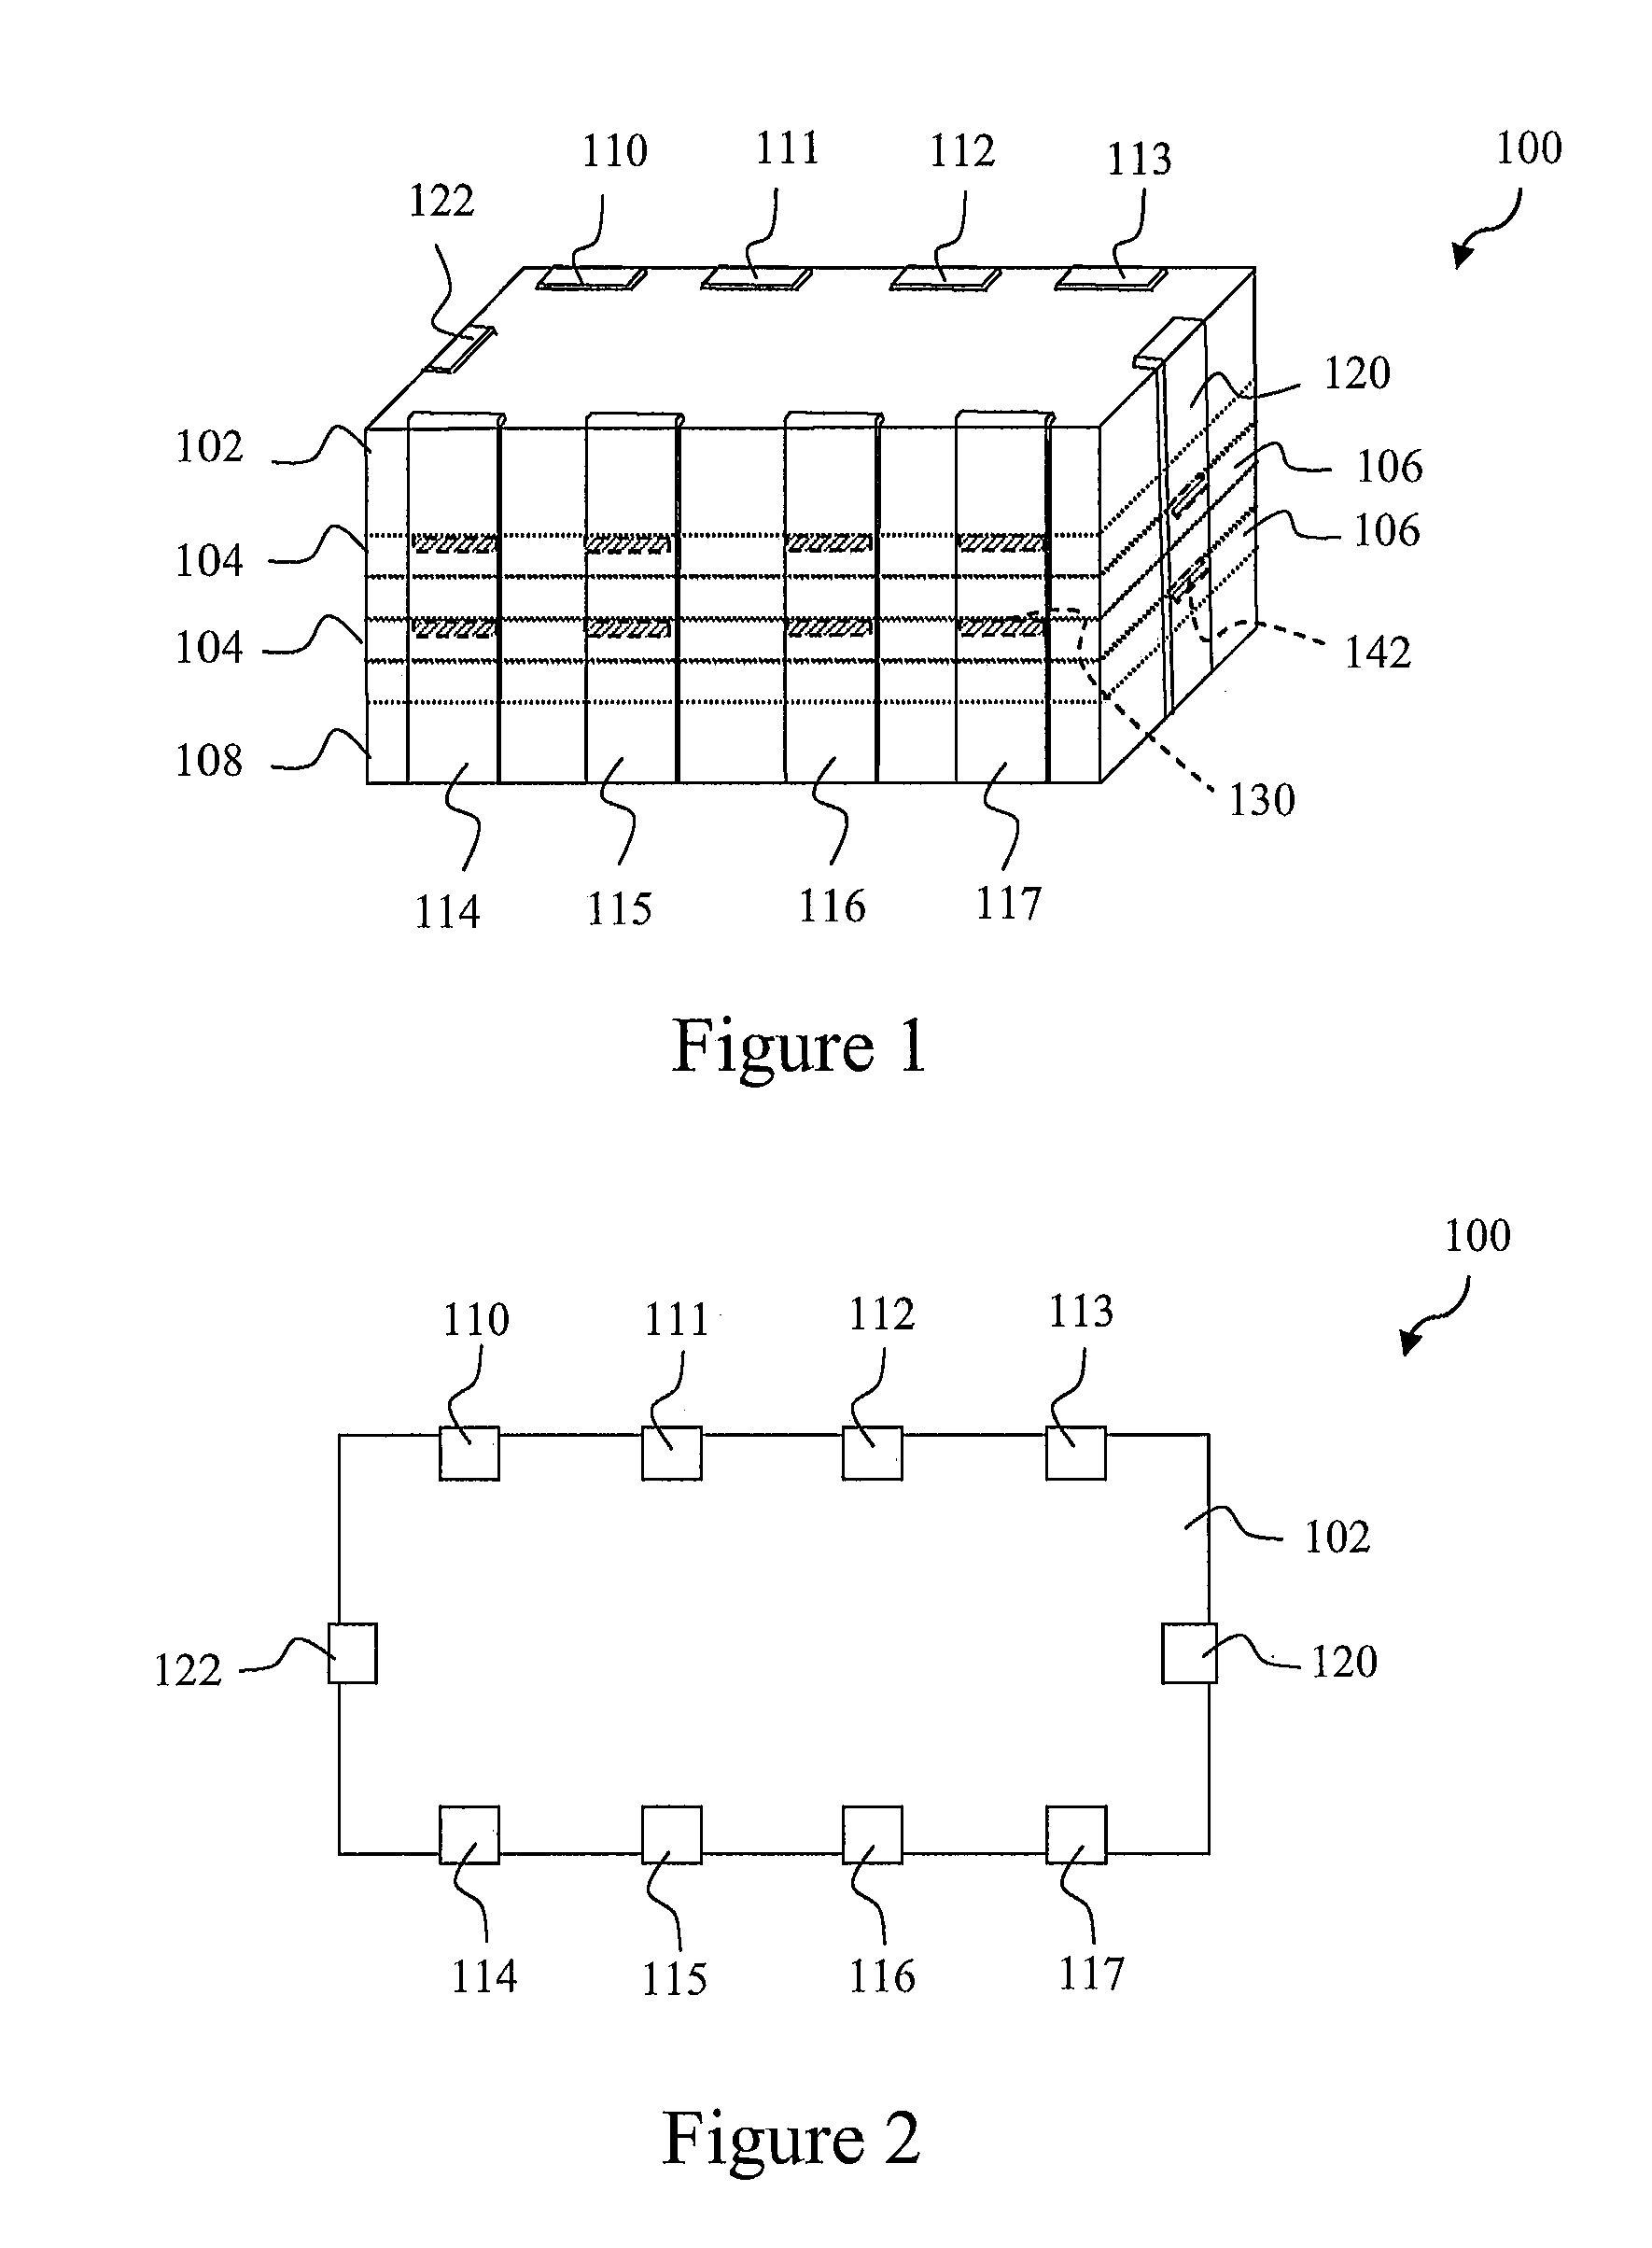 Element array and footprint layout for element array